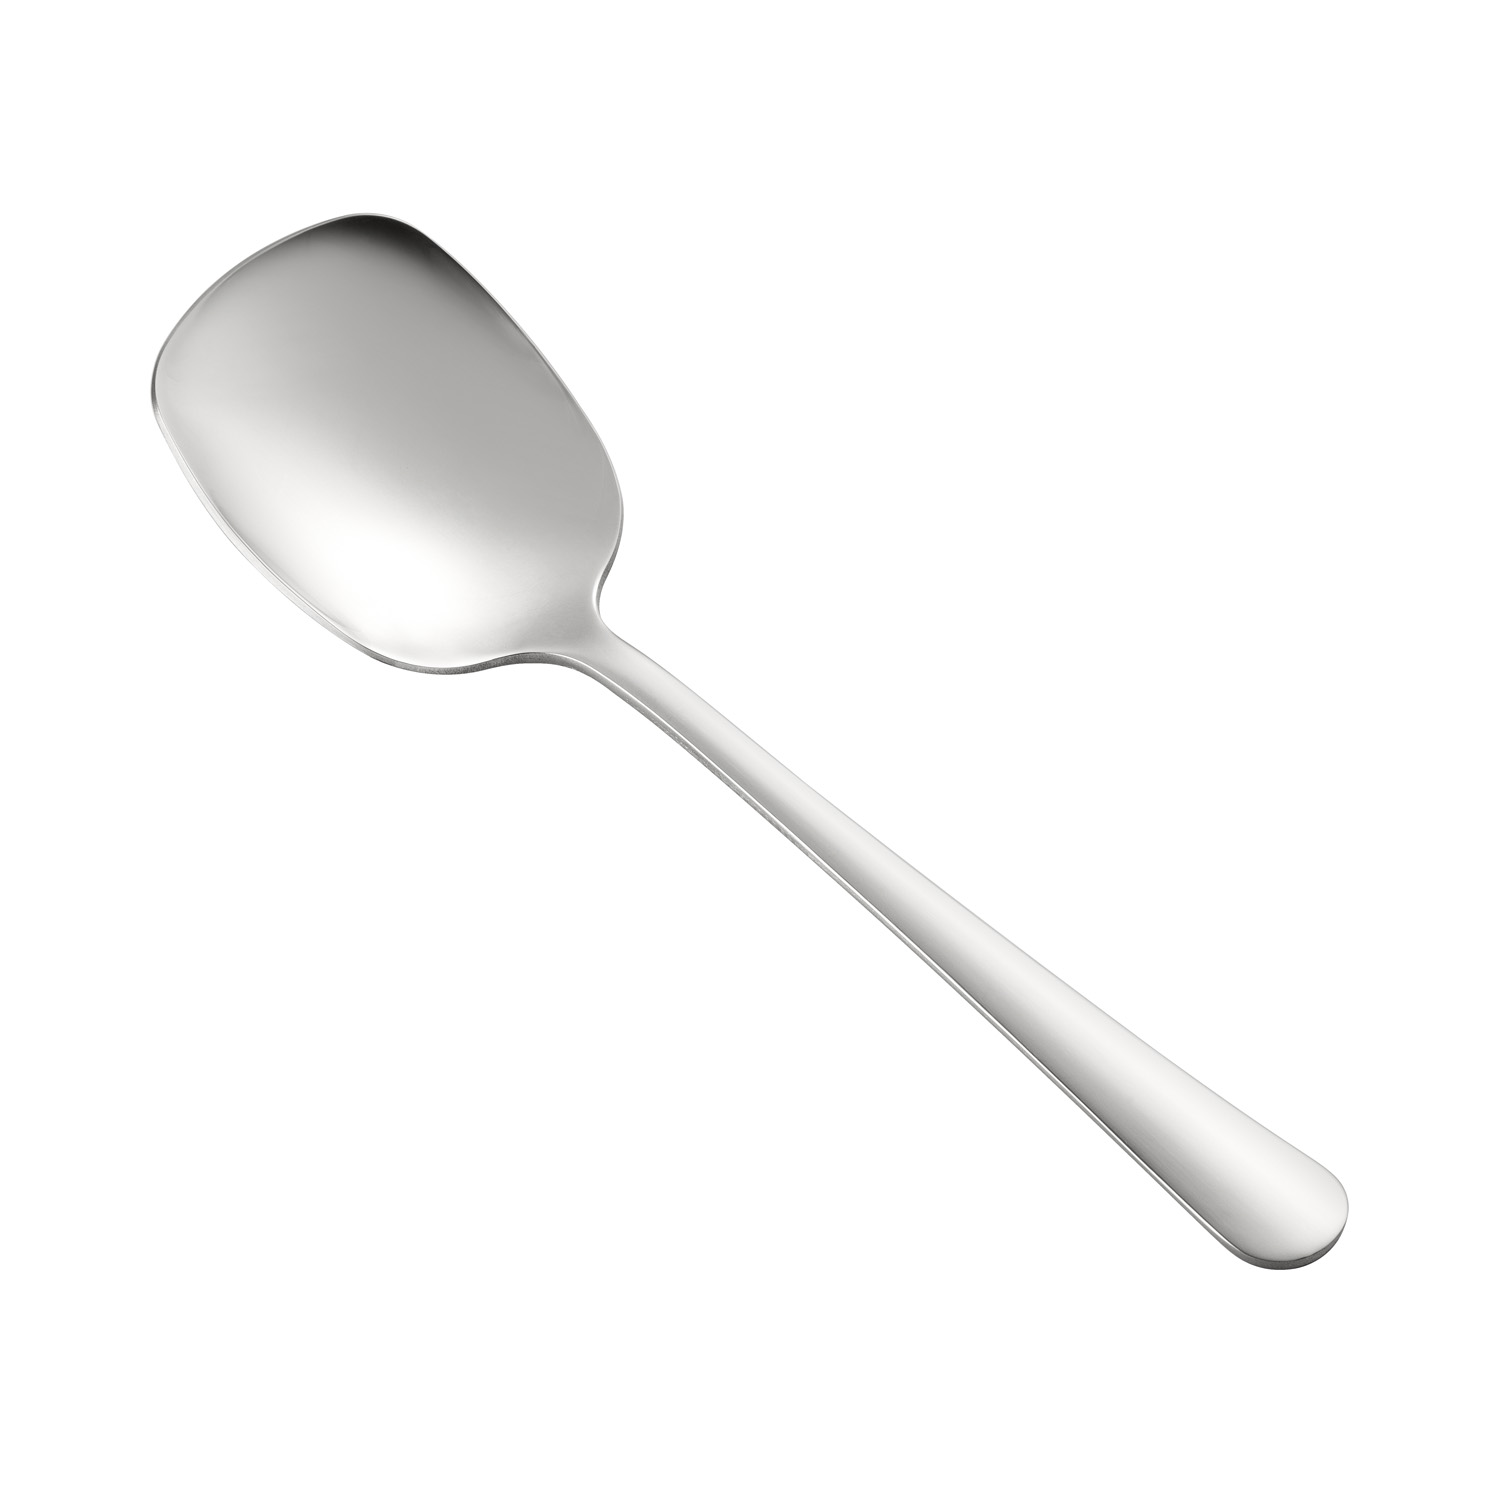 CAC China SSLS-8F Stainless Steel Serving Spoon with Flat Edge 8-1/2" - 1 dozen